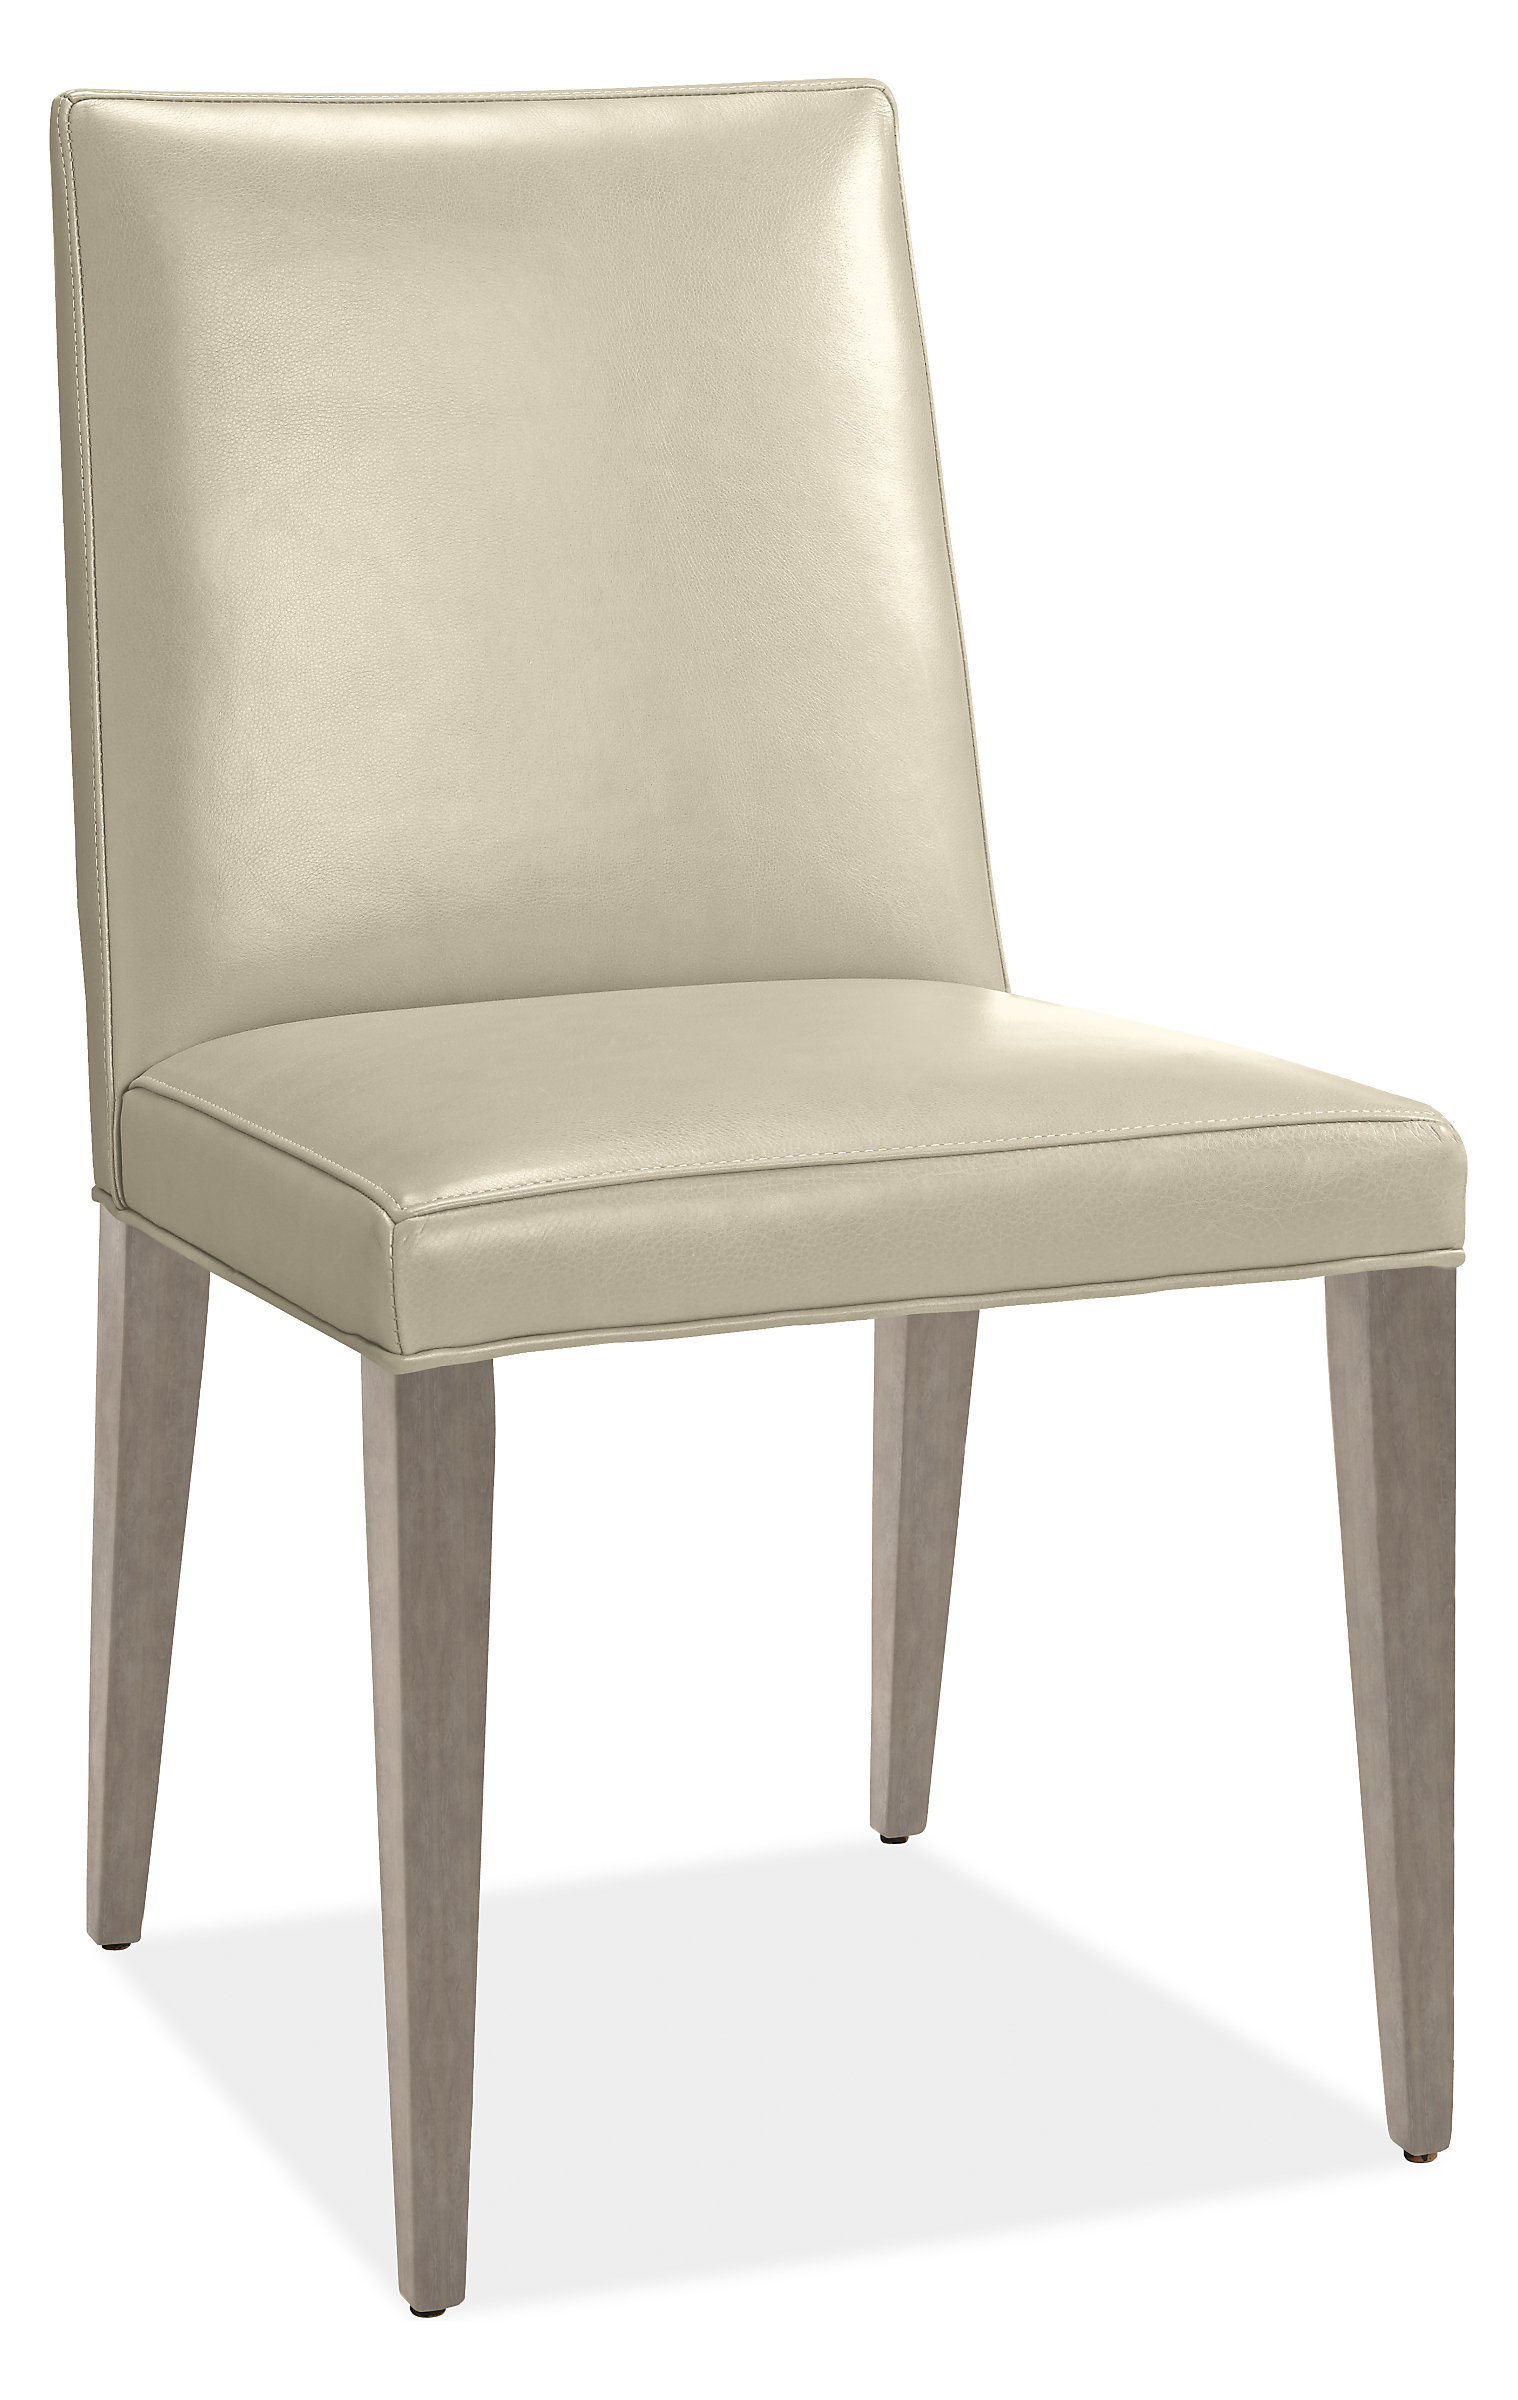 Ava High-Back Side Chair in Urbino Ivory Leather with Shell Legs